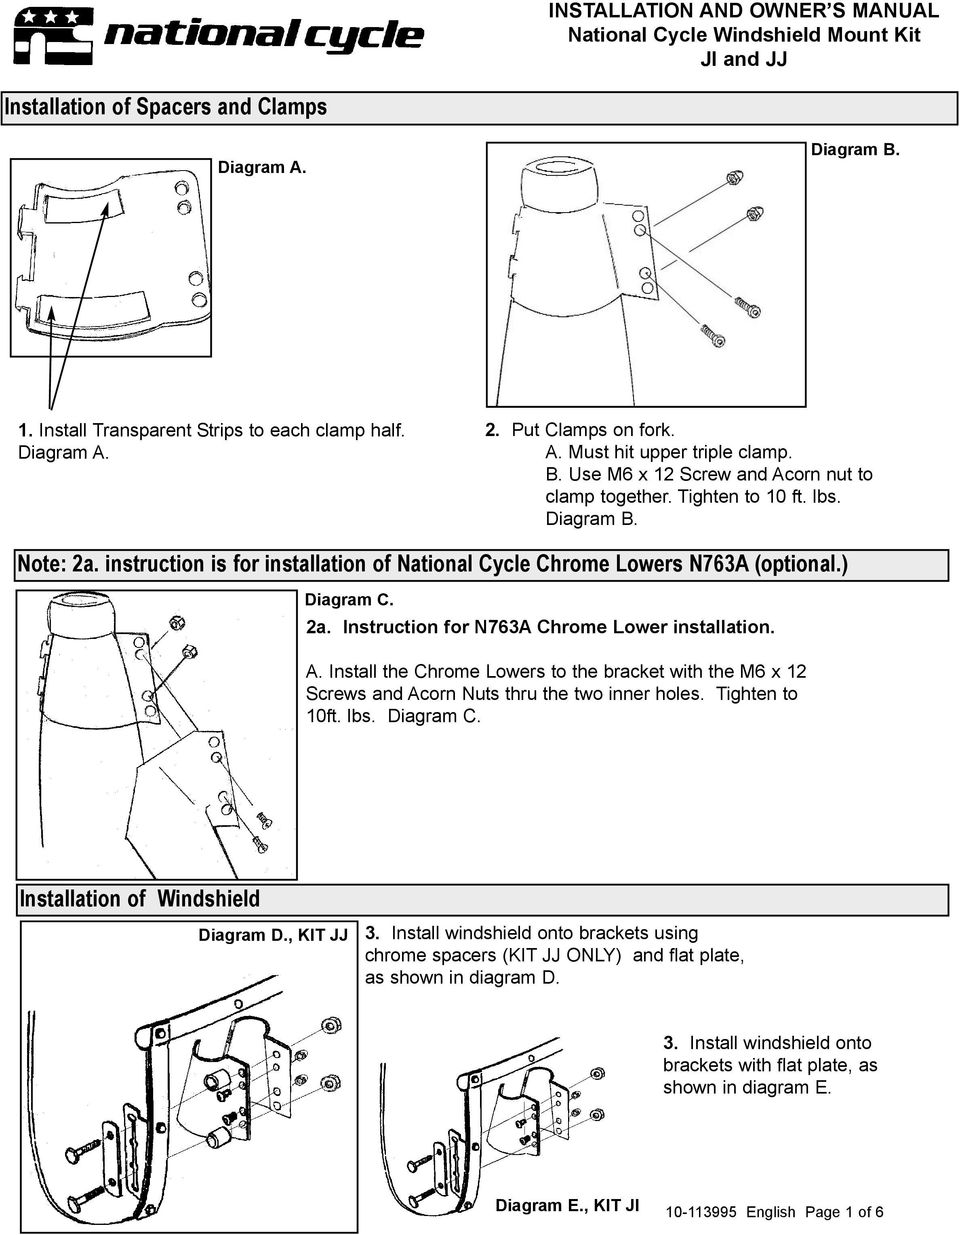 instruction is for installation of National Cycle Chrome Lowers N763A (optional.) Diagram C. 2a. Instruction for N763A Chrome Lower installation. A.